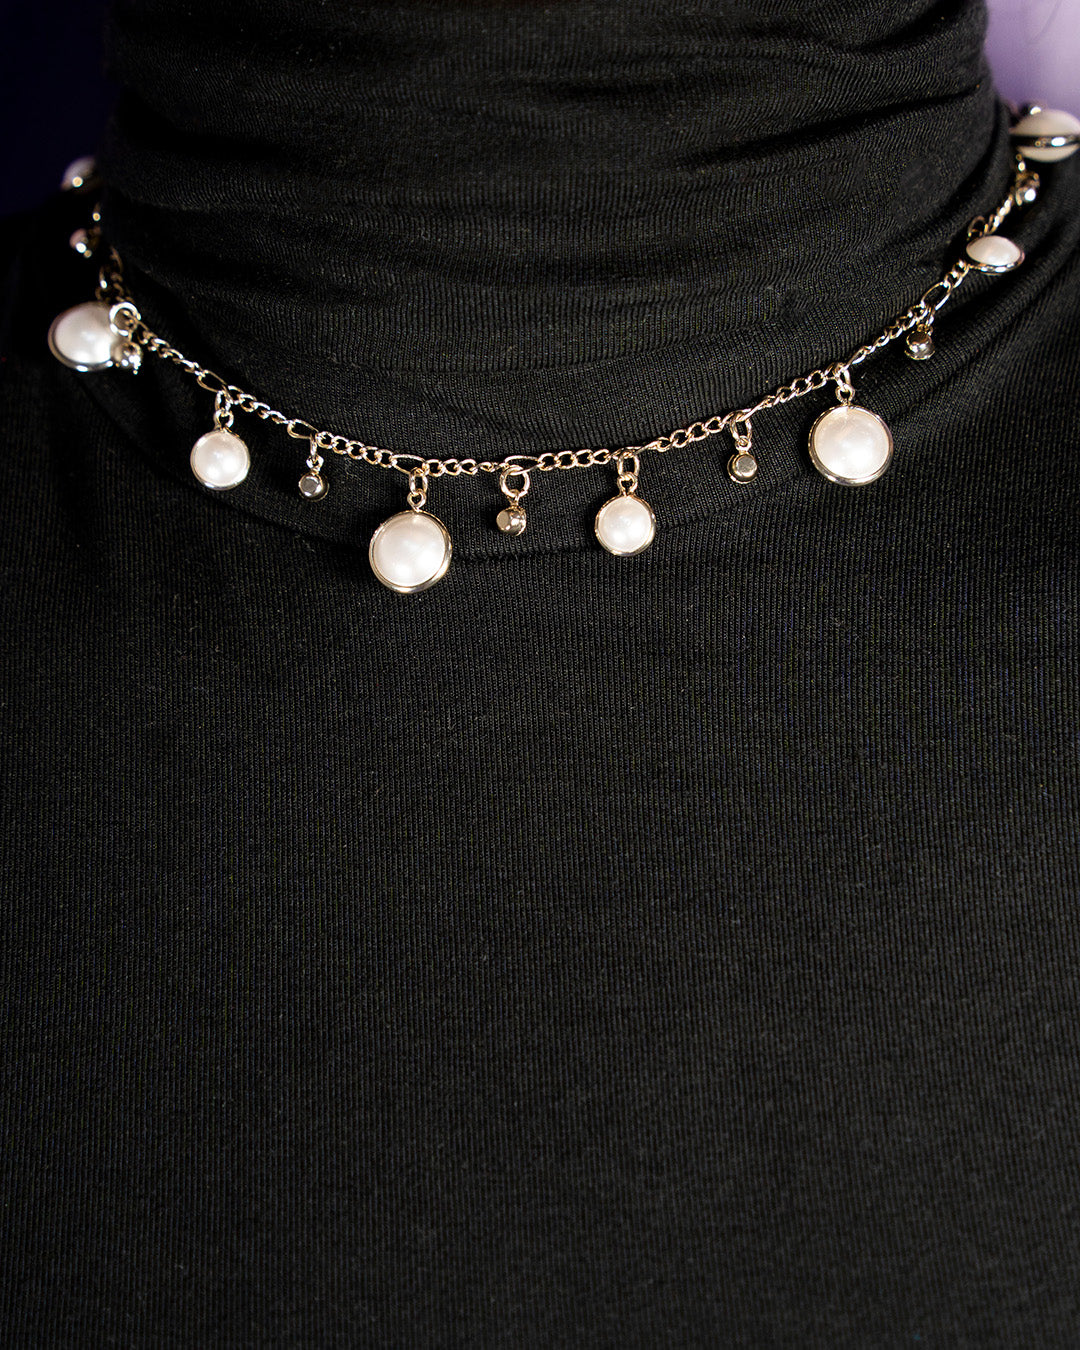 Water Pearls simple necklace